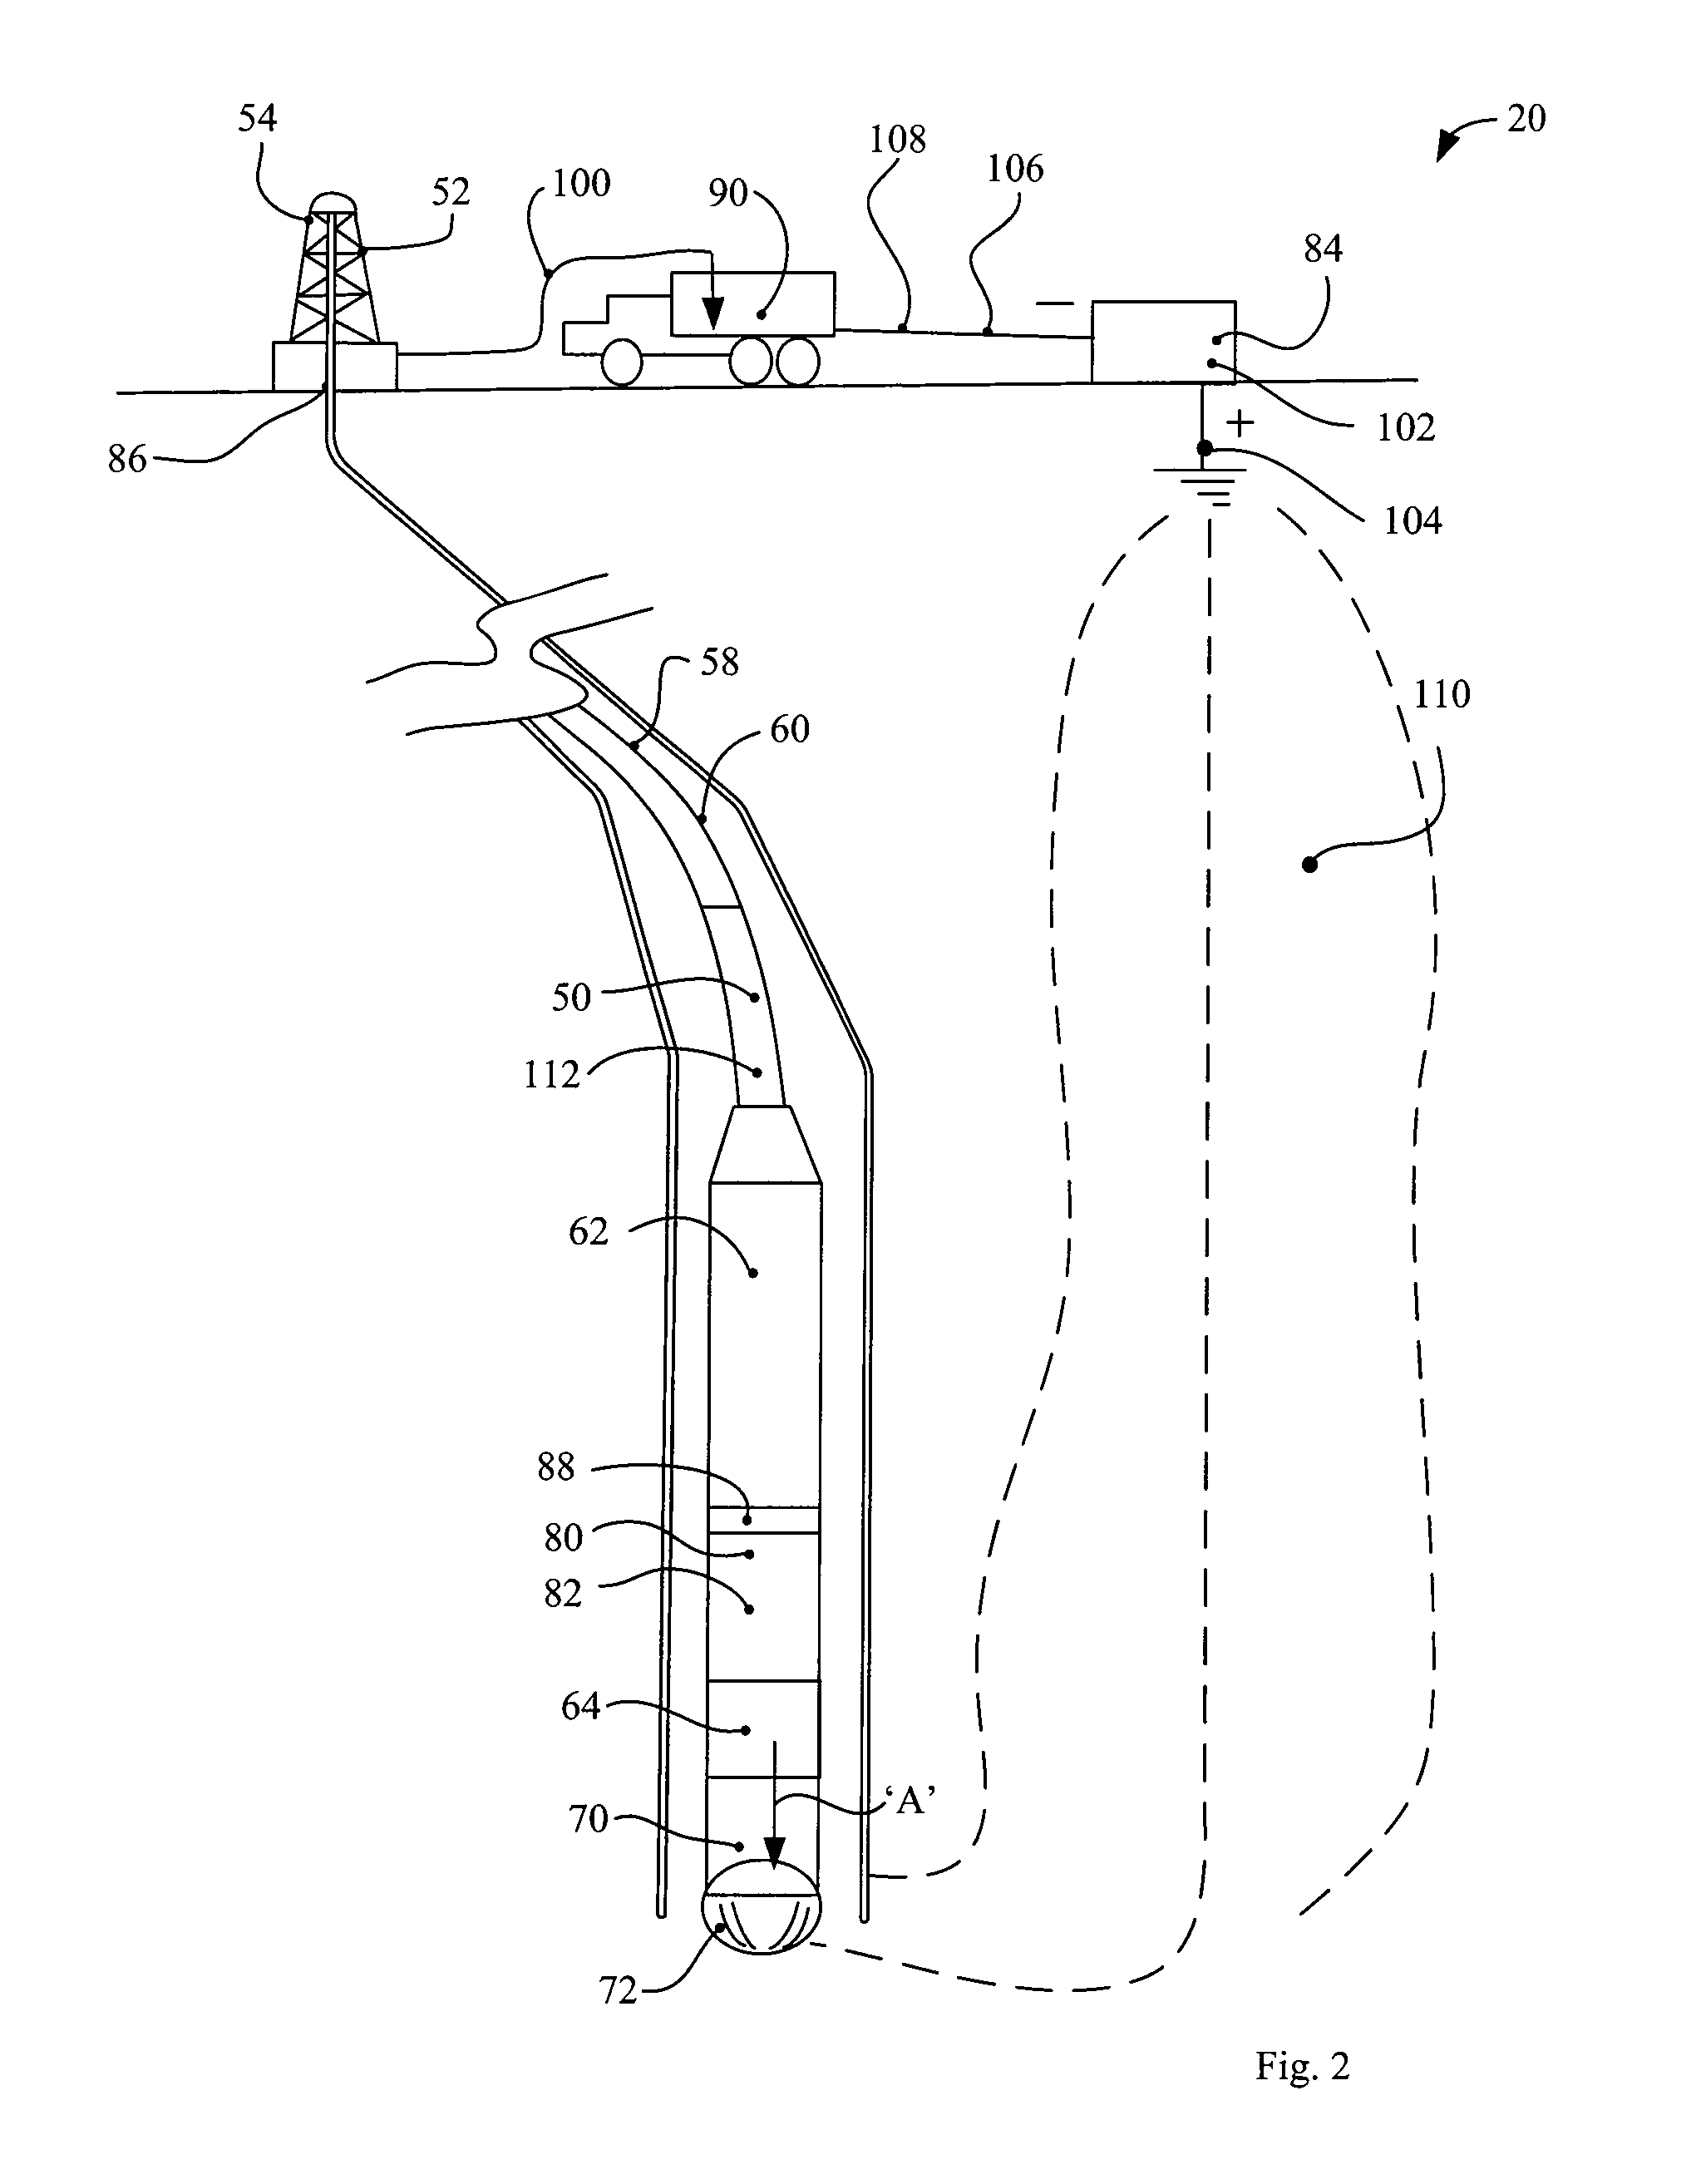 Downhole telemetry apparatus and method